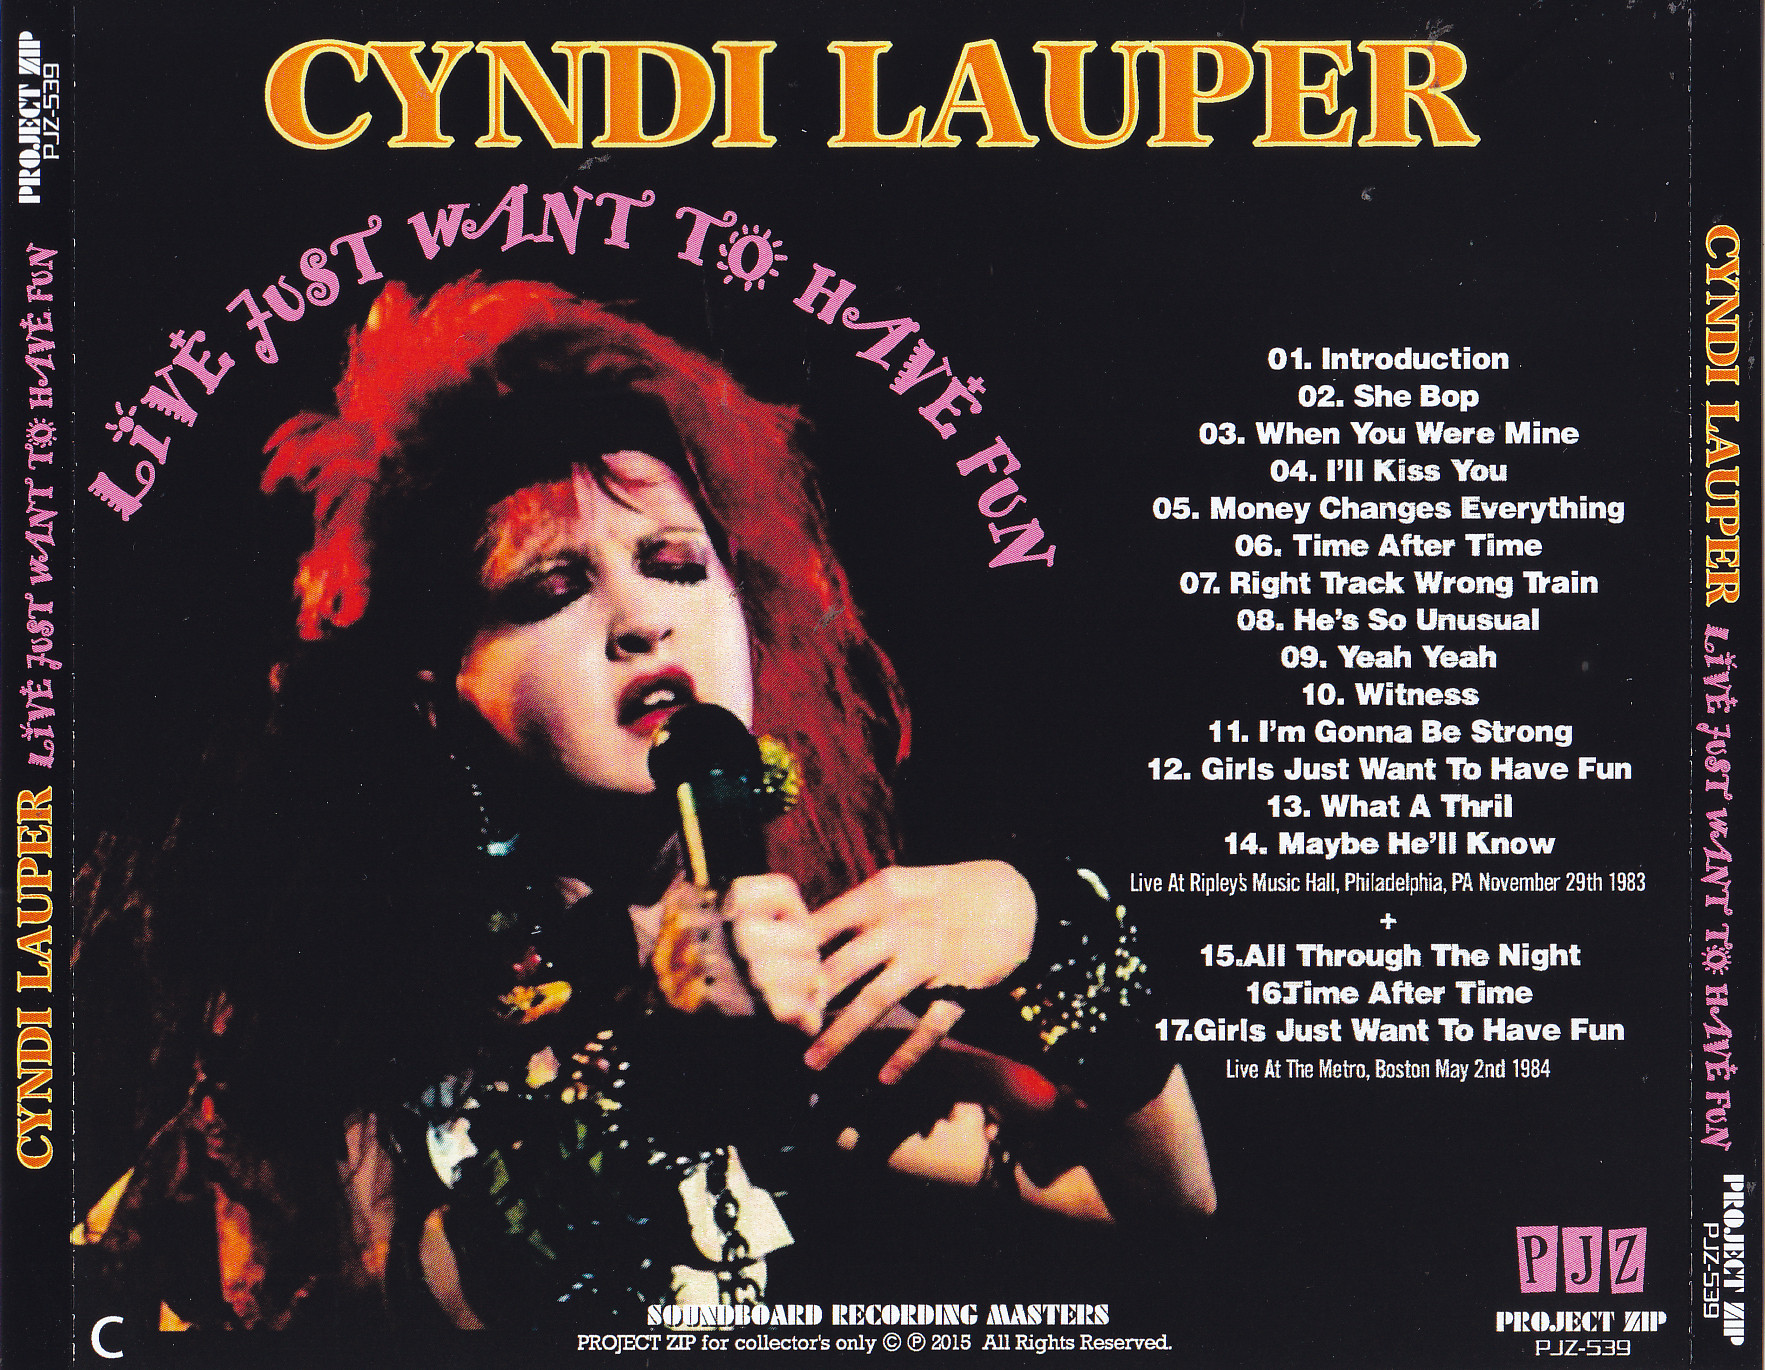 Cyndi Lauper Live Just Want To Have Fun 1cdr Giginjapan 5178